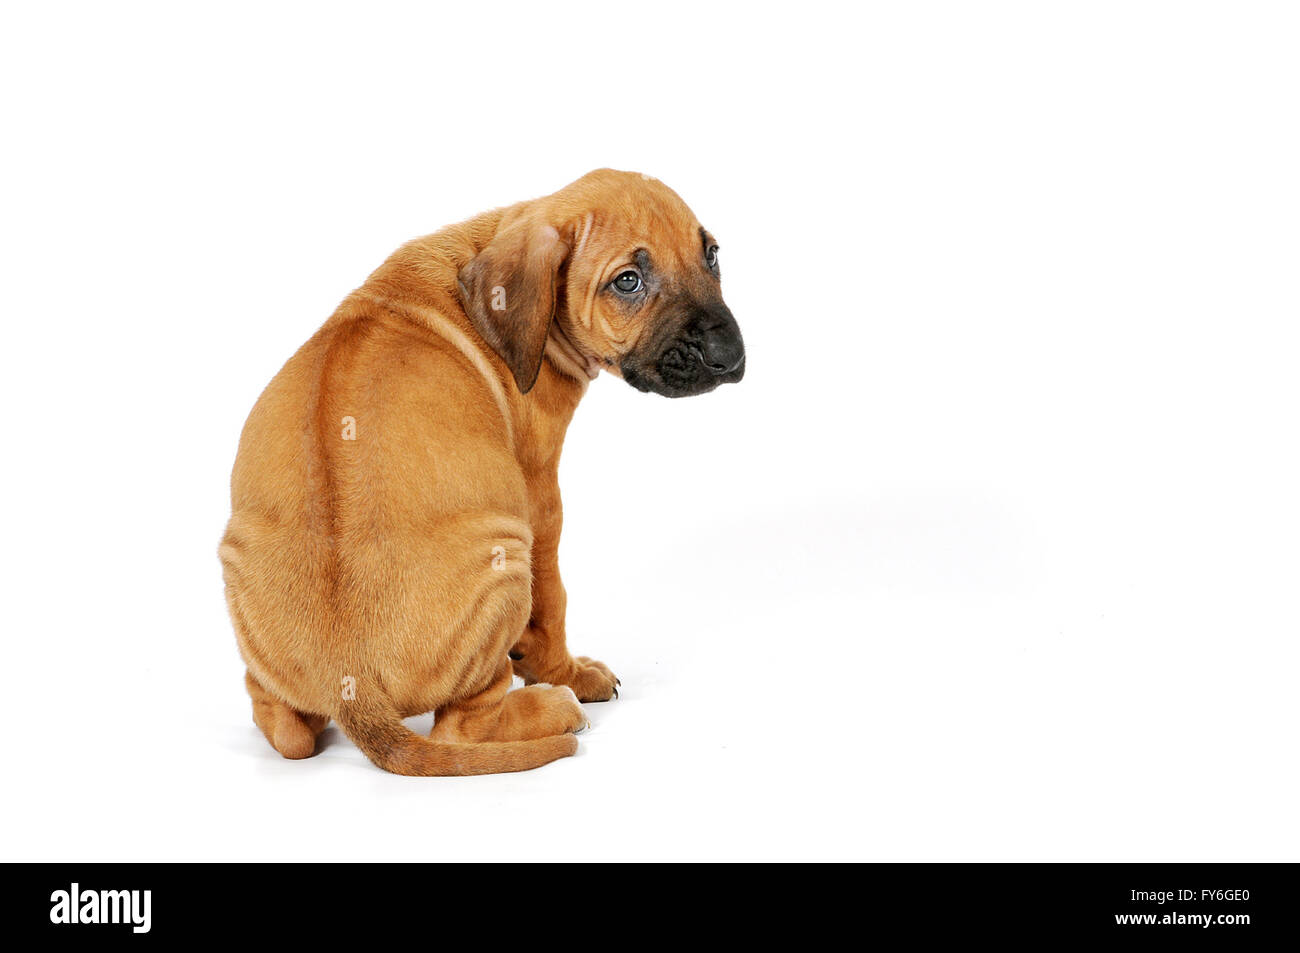 a rhodesian ridge back pupy at 8 weeks old on a white backdrop Stock Photo